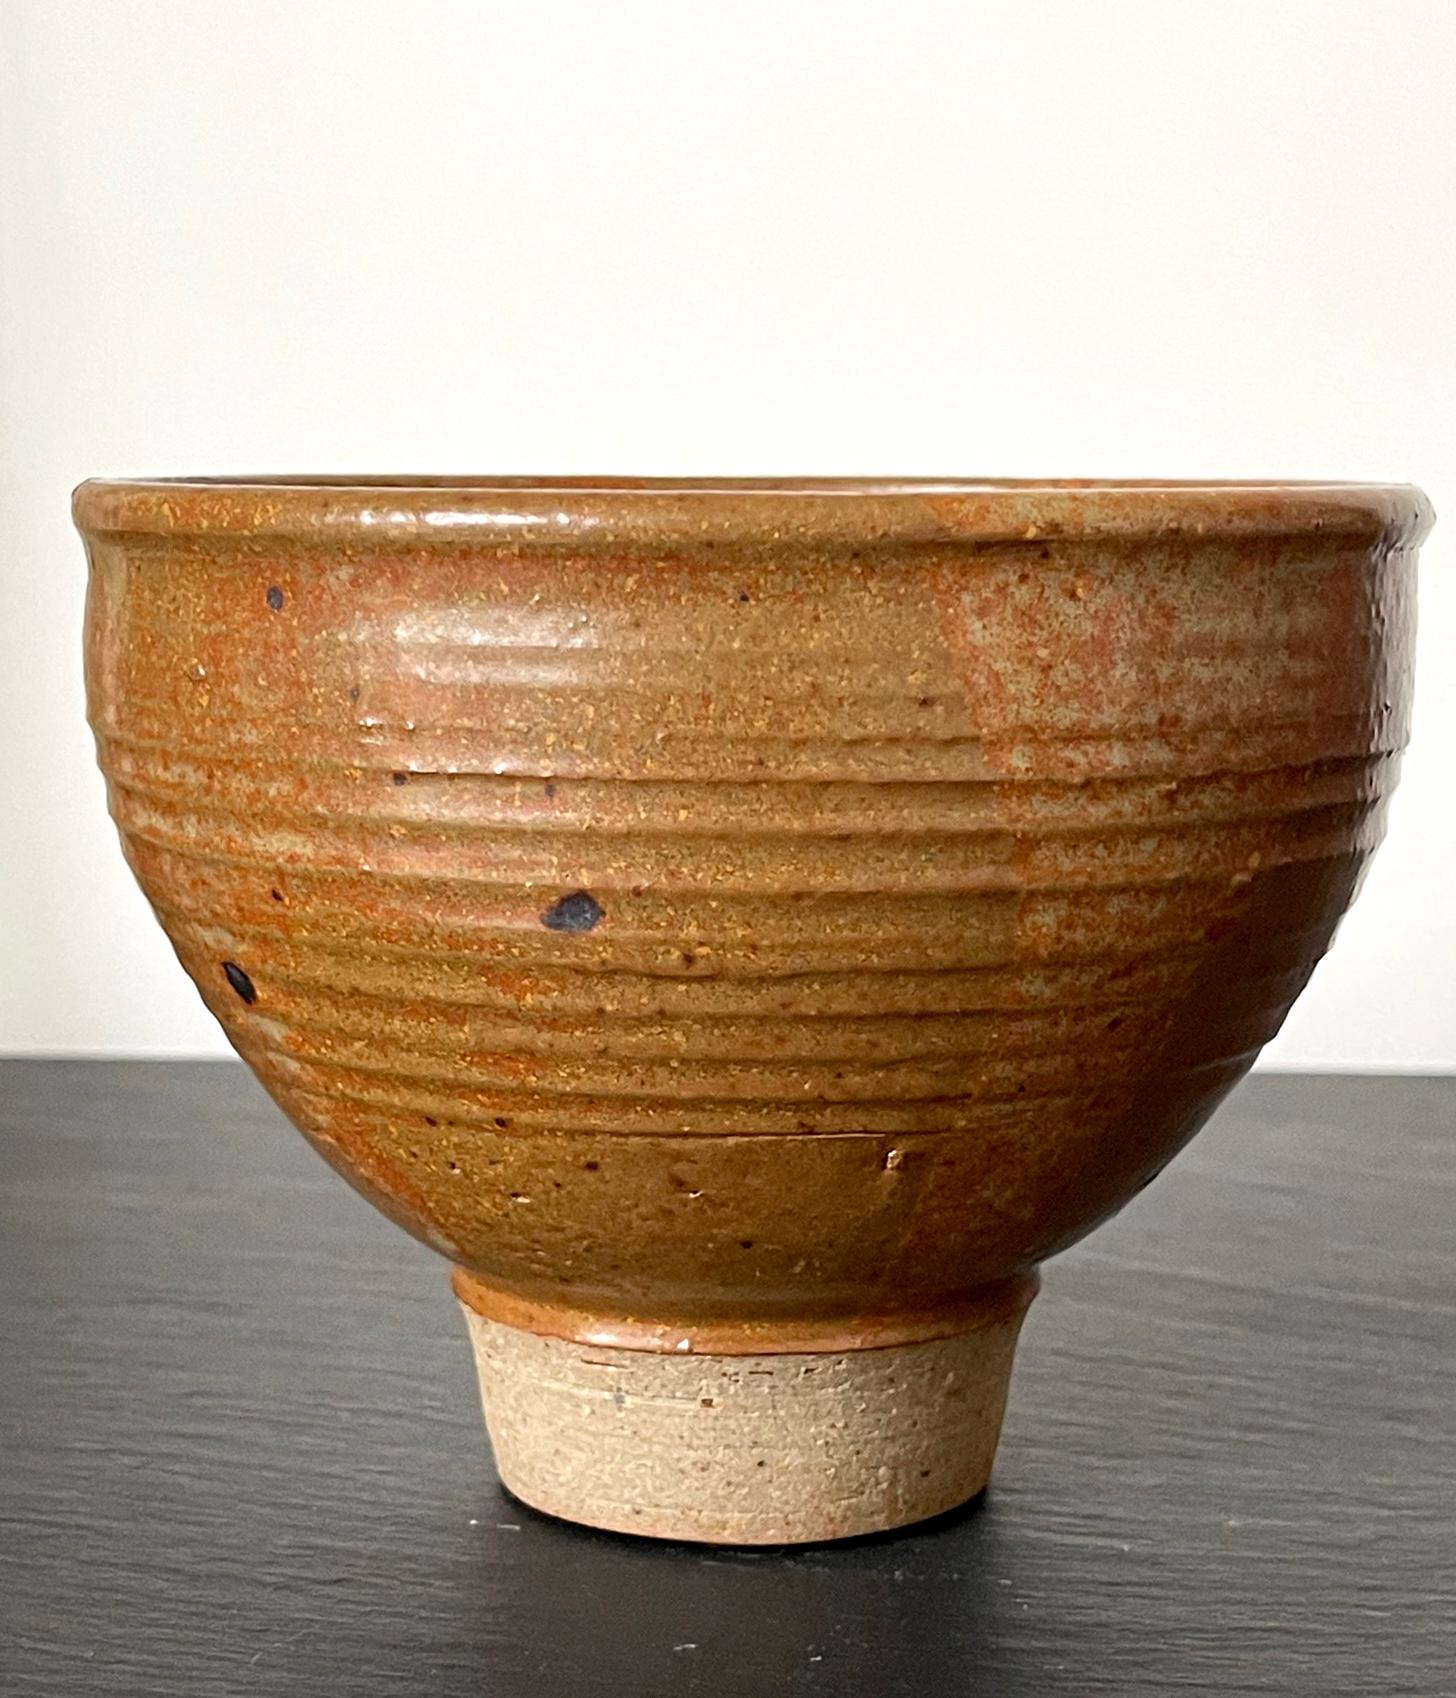 A ceramic tea bowl (chawan) with high foot by Japanese American artist Toshiko Takaezu (American, 1922 - 2011). This particular chawan form is supported by a higher foot rim than usual which was left unglazed intentionally. The well-balanced form is